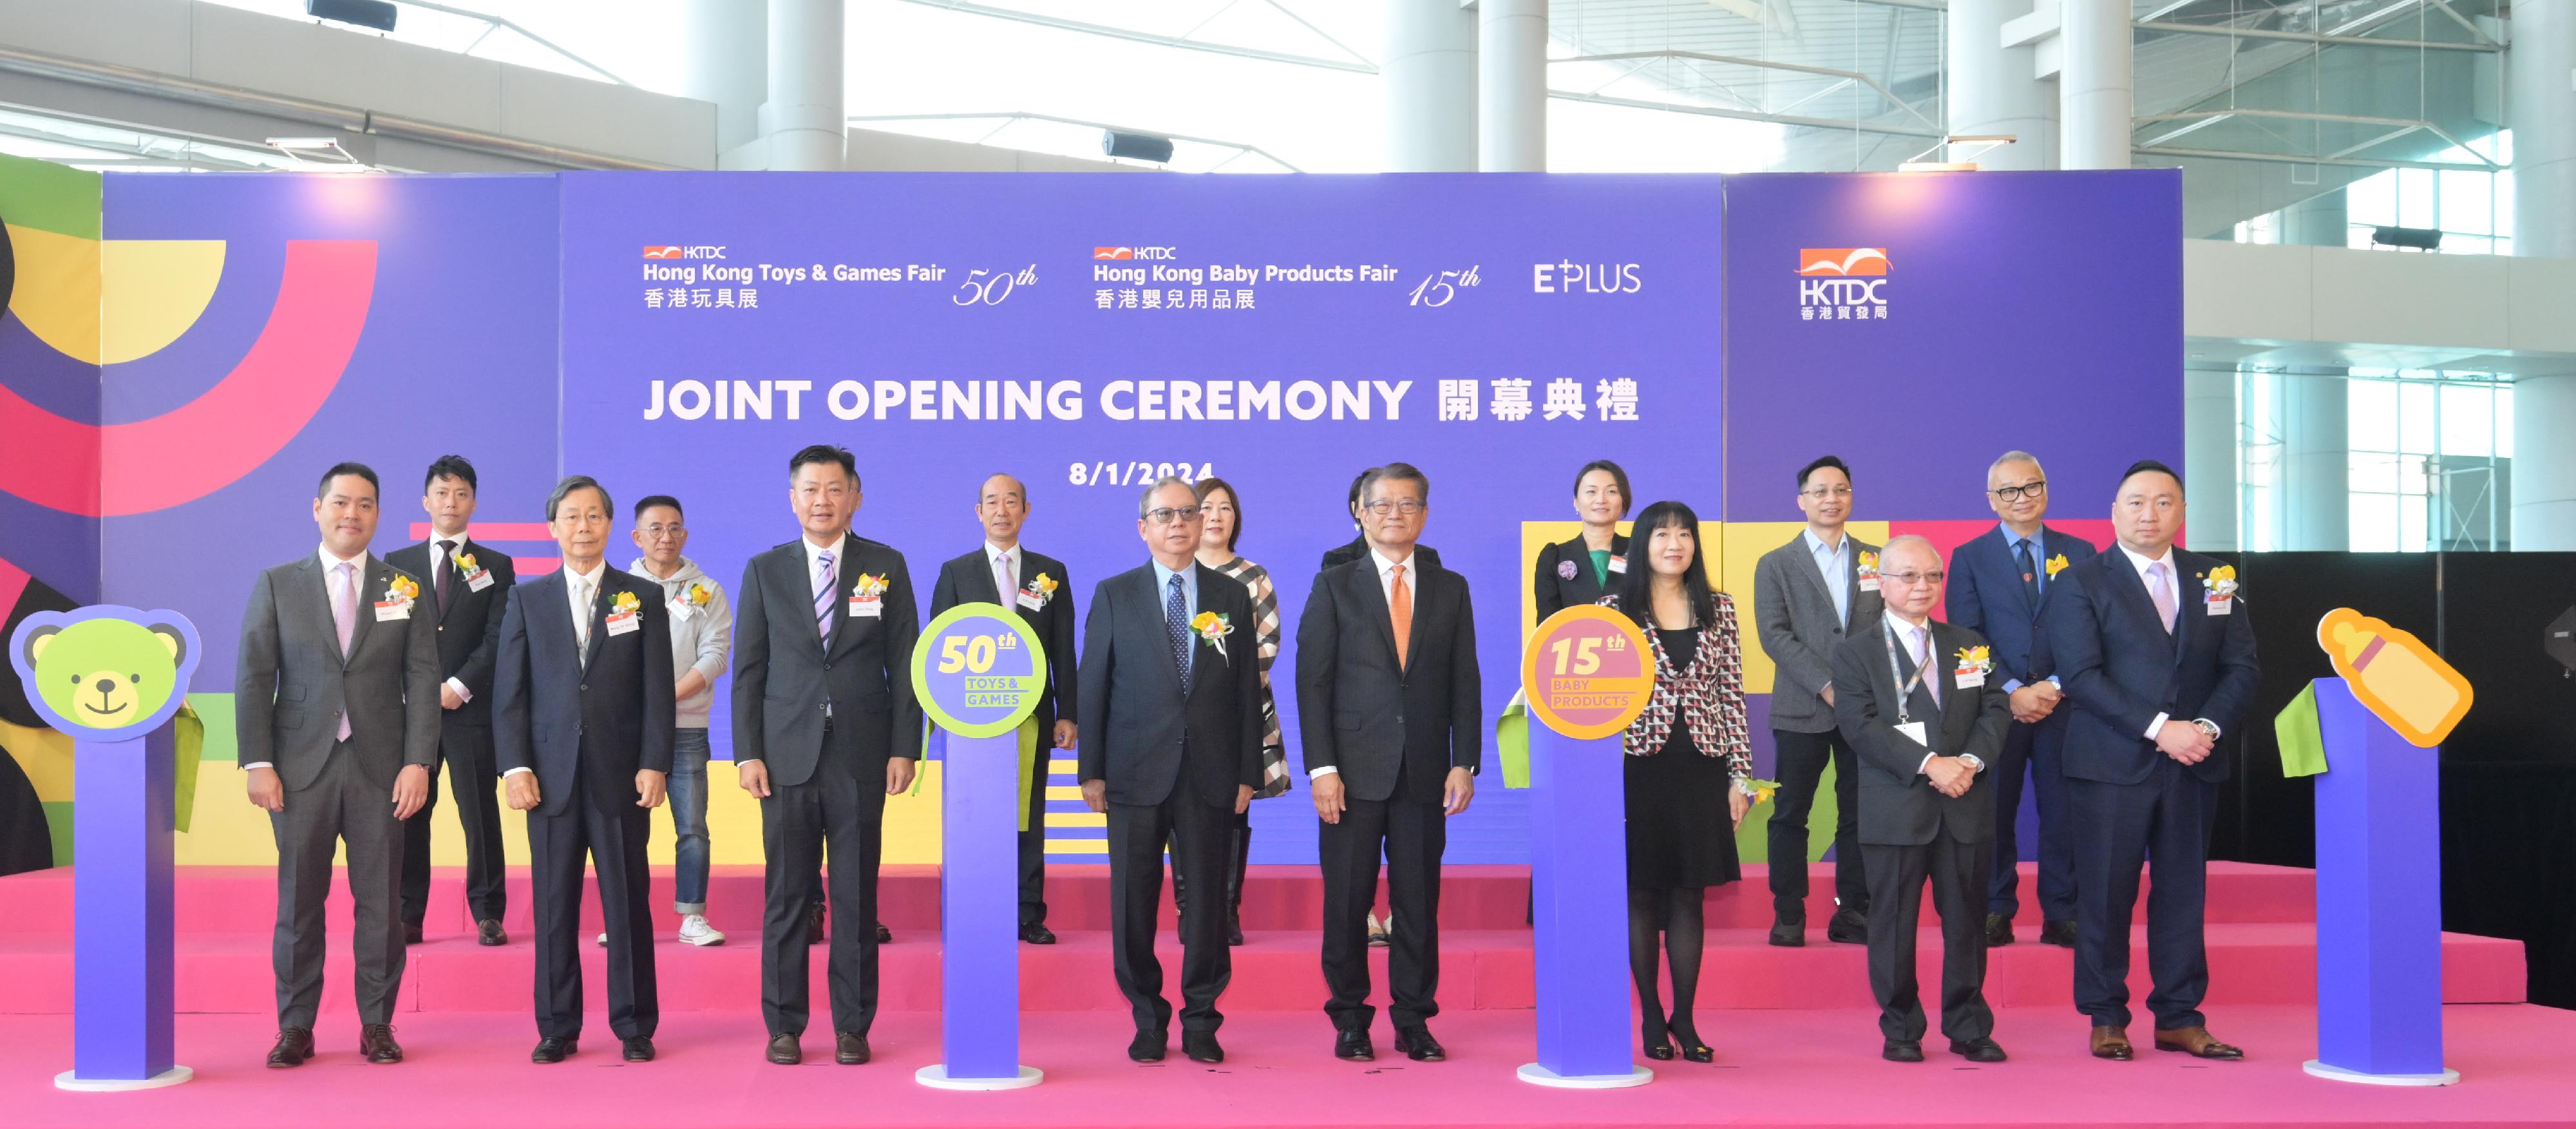 The Financial Secretary, Mr Paul Chan, attended the Joint Opening Ceremony of the HKTDC Hong Kong Toys & Games Fair and HKTDC Hong Kong Baby Products Fair 2024 organised by the Hong Kong Trade Development Council (HKTDC) this morning (January 8). Photo shows (front row, from third left) the Chairman of the HKTDC Toys Advisory Committee, Mr John Tong; the Chairman of the HKTDC, Dr Peter Lam; Mr Chan; the Executive Director of the HKTDC, Ms Margaret Fong, and other guests at the Joint Opening Ceremony.